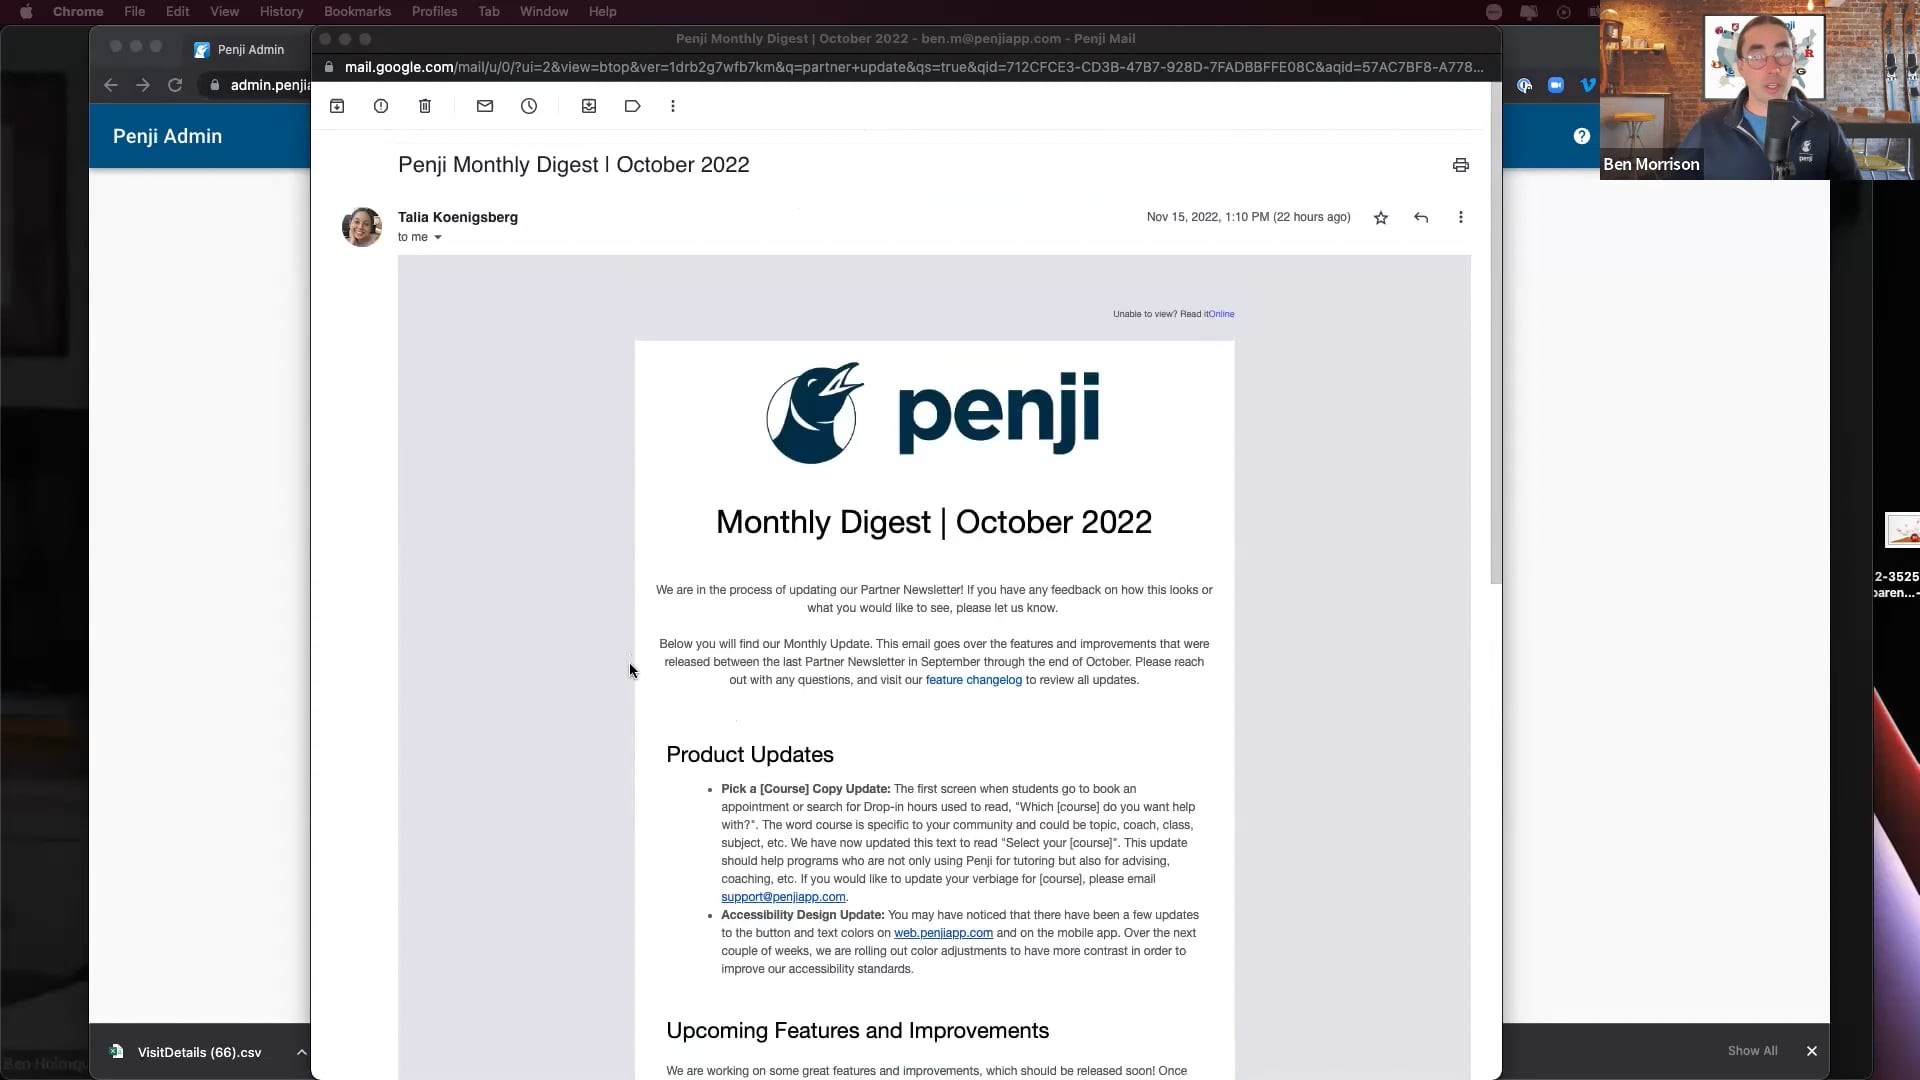 Penji Weekly 54: New and Upcoming Features, Plans for Pathways, Monthly Newsletter Feedback